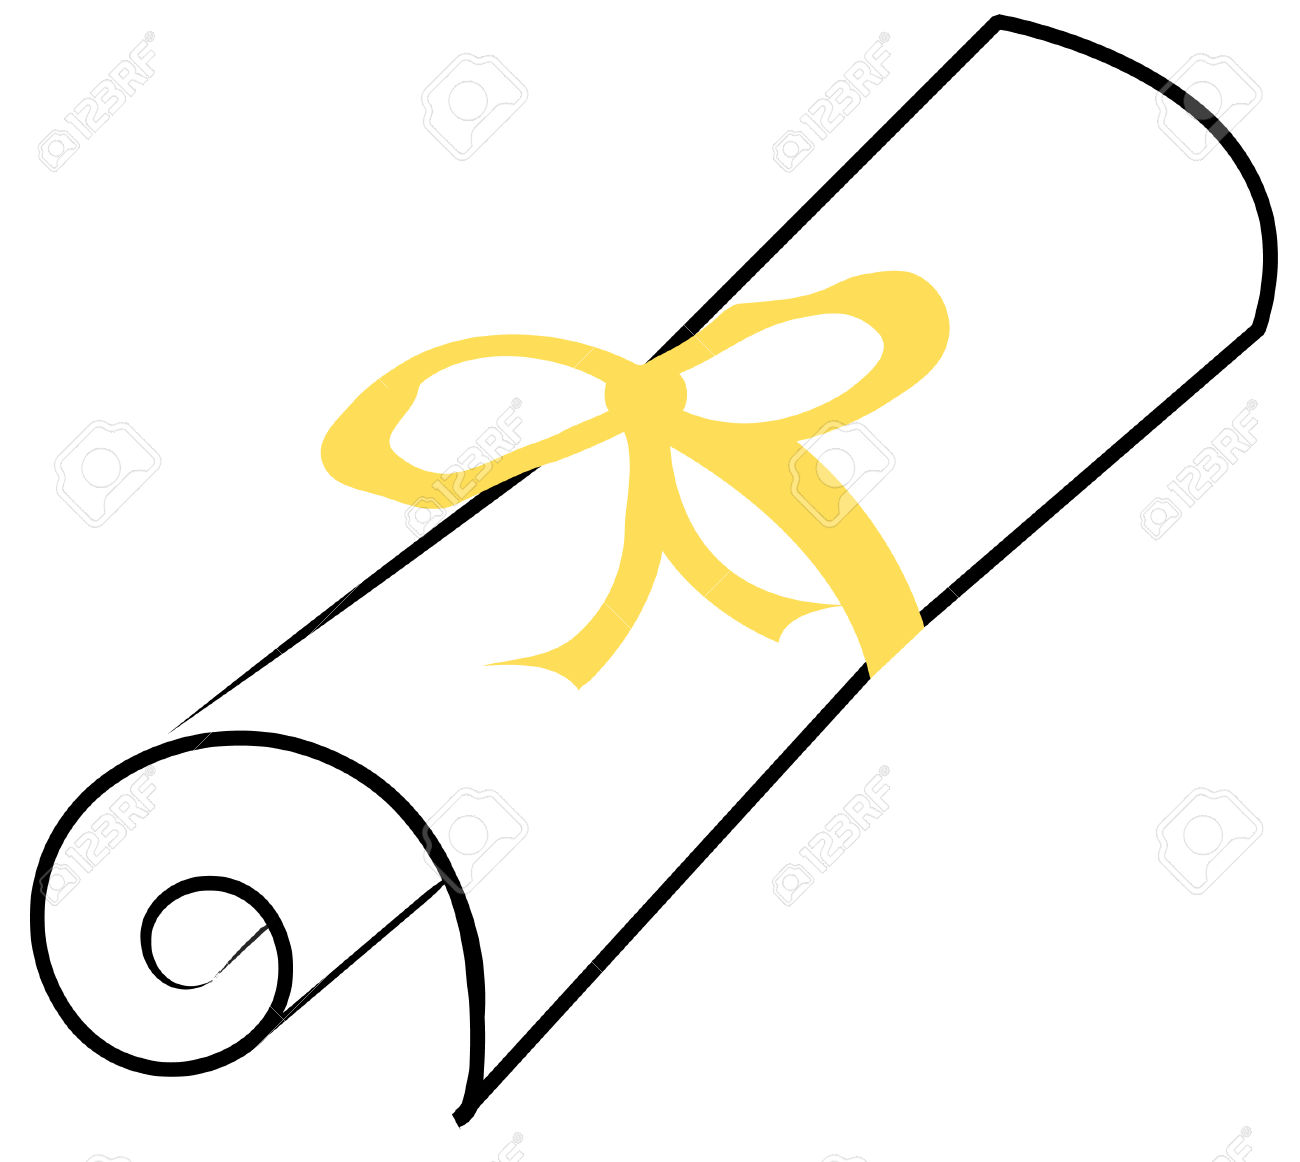 scroll-clipart-graduation-scroll-graduation-transparent-free-for-download-on-webstockreview-2022